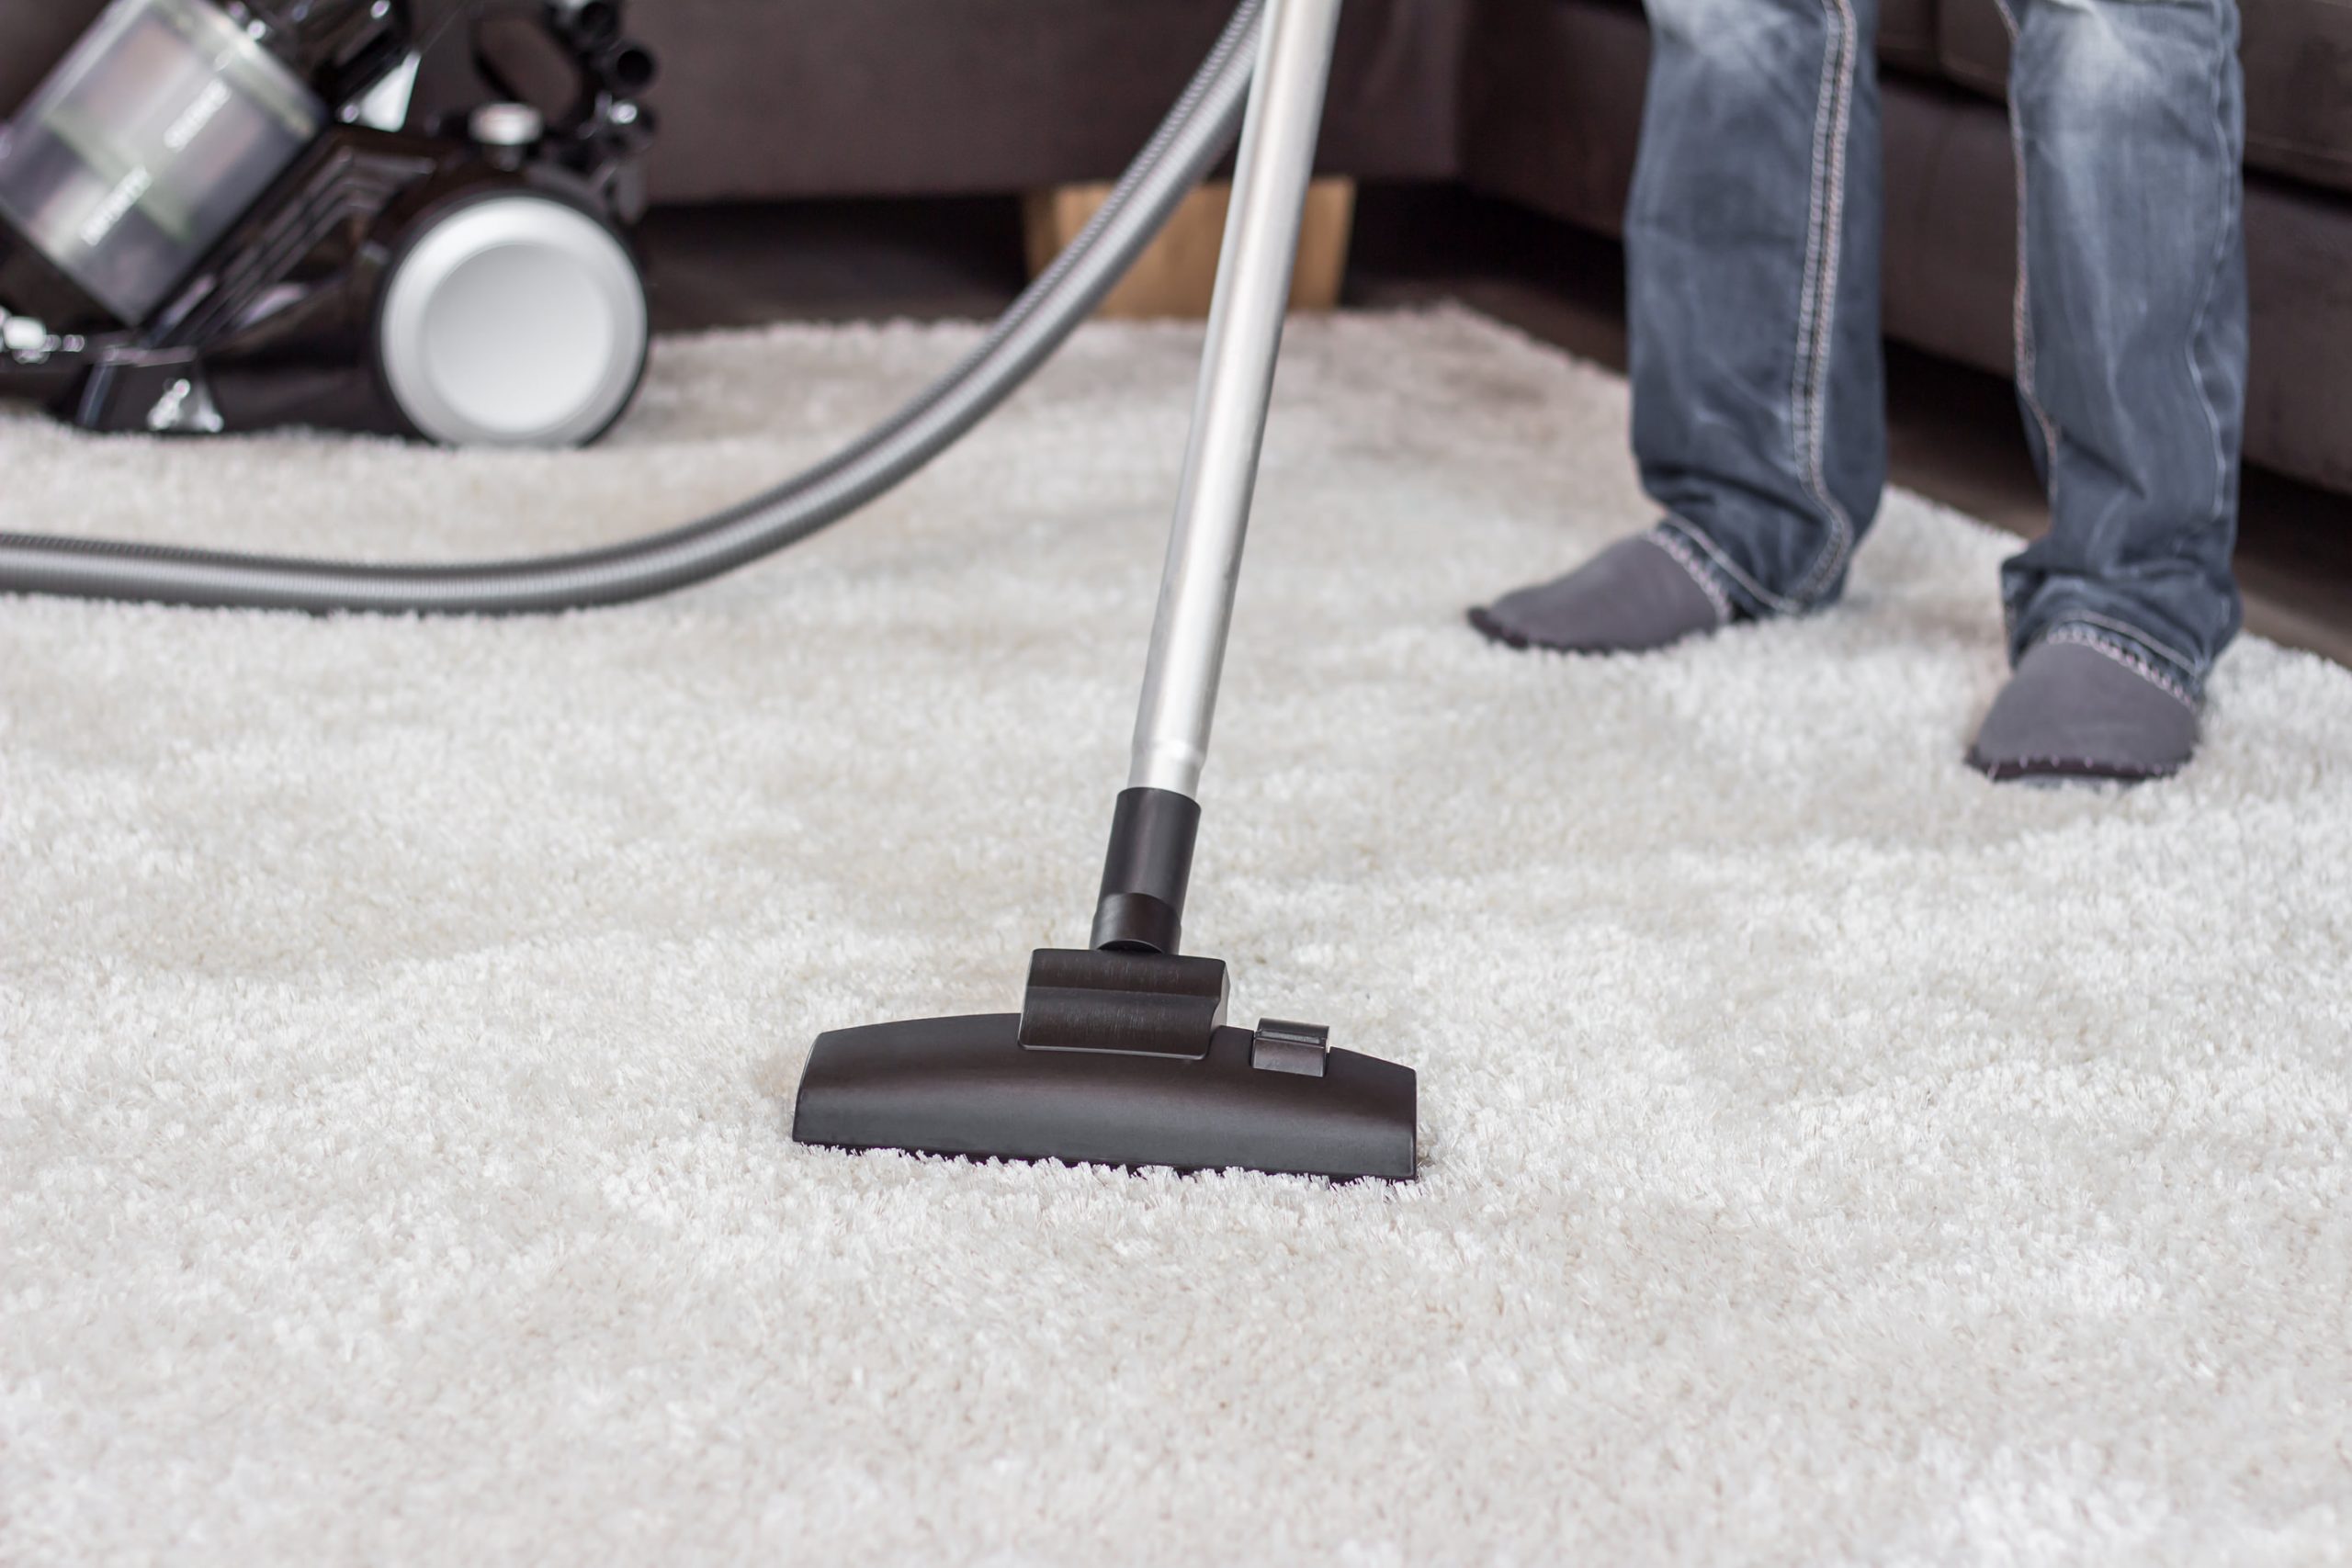 Carpet & Indoor Air Quality: The Research May Surprise You